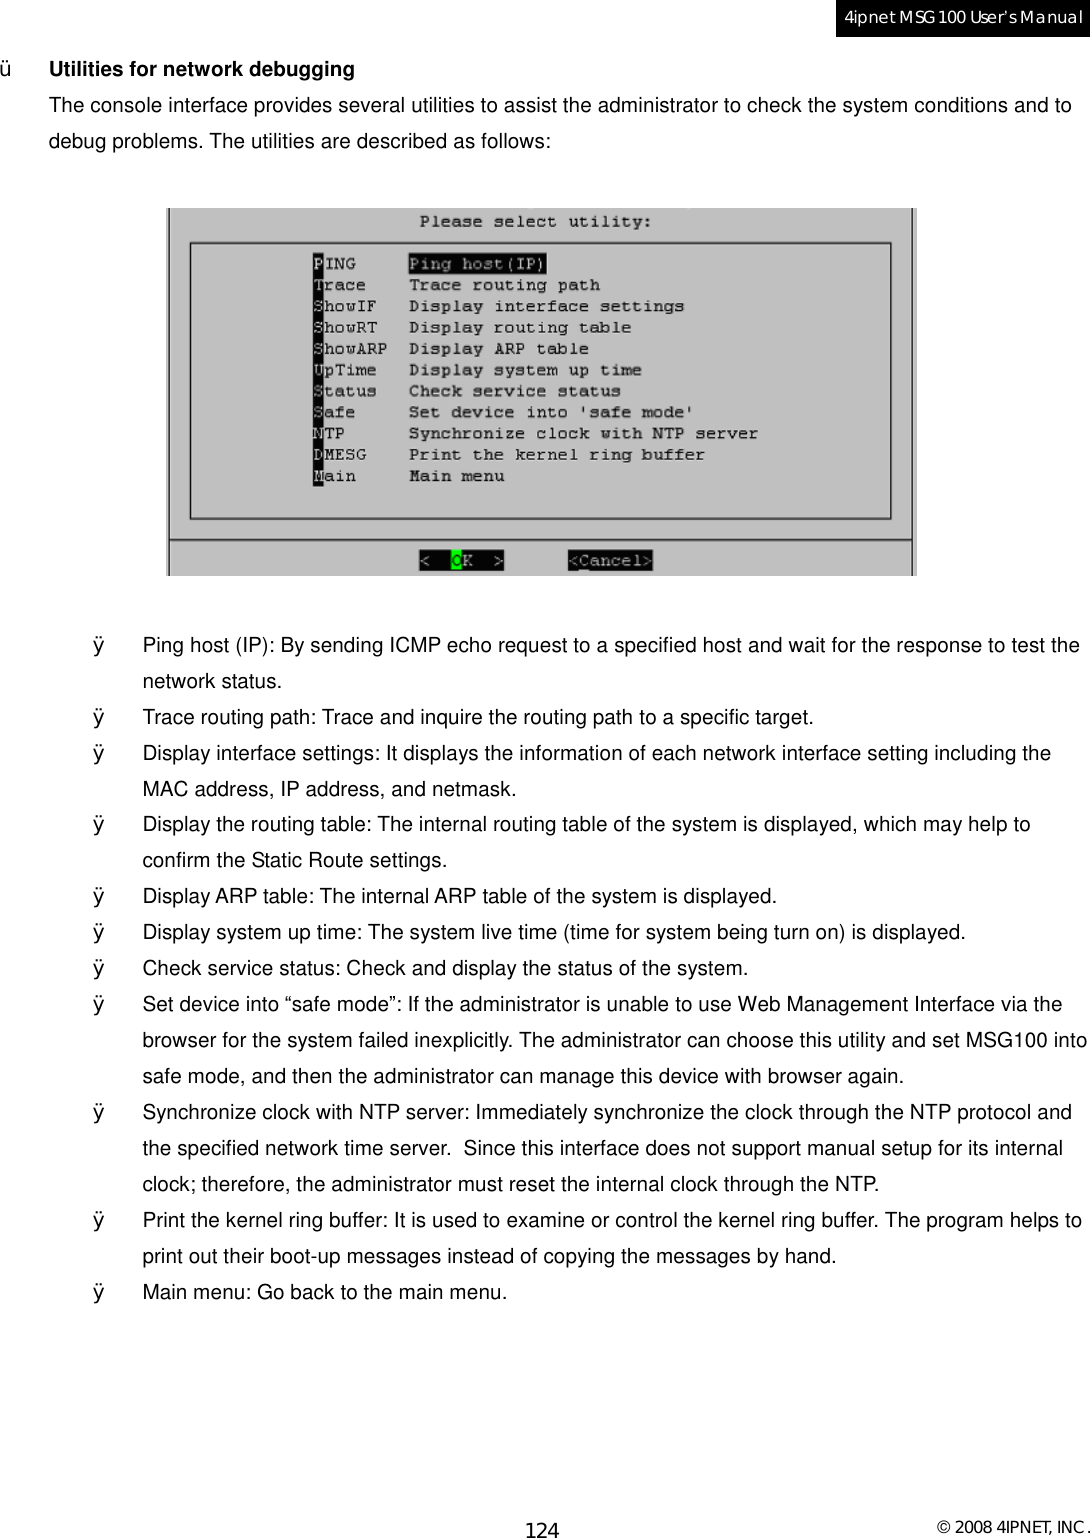  © 2008 4IPNET, INC. 124 4ipnet MSG100 User’s Manual  Ÿ Utilities for network debugging The console interface provides several utilities to assist the administrator to check the system conditions and to debug problems. The utilities are described as follows:     Ø Ping host (IP): By sending ICMP echo request to a specified host and wait for the response to test the network status. Ø Trace routing path: Trace and inquire the routing path to a specific target. Ø Display interface settings: It displays the information of each network interface setting including the MAC address, IP address, and netmask. Ø Display the routing table: The internal routing table of the system is displayed, which may help to confirm the Static Route settings. Ø Display ARP table: The internal ARP table of the system is displayed. Ø Display system up time: The system live time (time for system being turn on) is displayed. Ø Check service status: Check and display the status of the system. Ø Set device into “safe mode”: If the administrator is unable to use Web Management Interface via the browser for the system failed inexplicitly. The administrator can choose this utility and set MSG100 into safe mode, and then the administrator can manage this device with browser again. Ø Synchronize clock with NTP server: Immediately synchronize the clock through the NTP protocol and the specified network time server.  Since this interface does not support manual setup for its internal clock; therefore, the administrator must reset the internal clock through the NTP. Ø Print the kernel ring buffer: It is used to examine or control the kernel ring buffer. The program helps to print out their boot-up messages instead of copying the messages by hand. Ø Main menu: Go back to the main menu. 